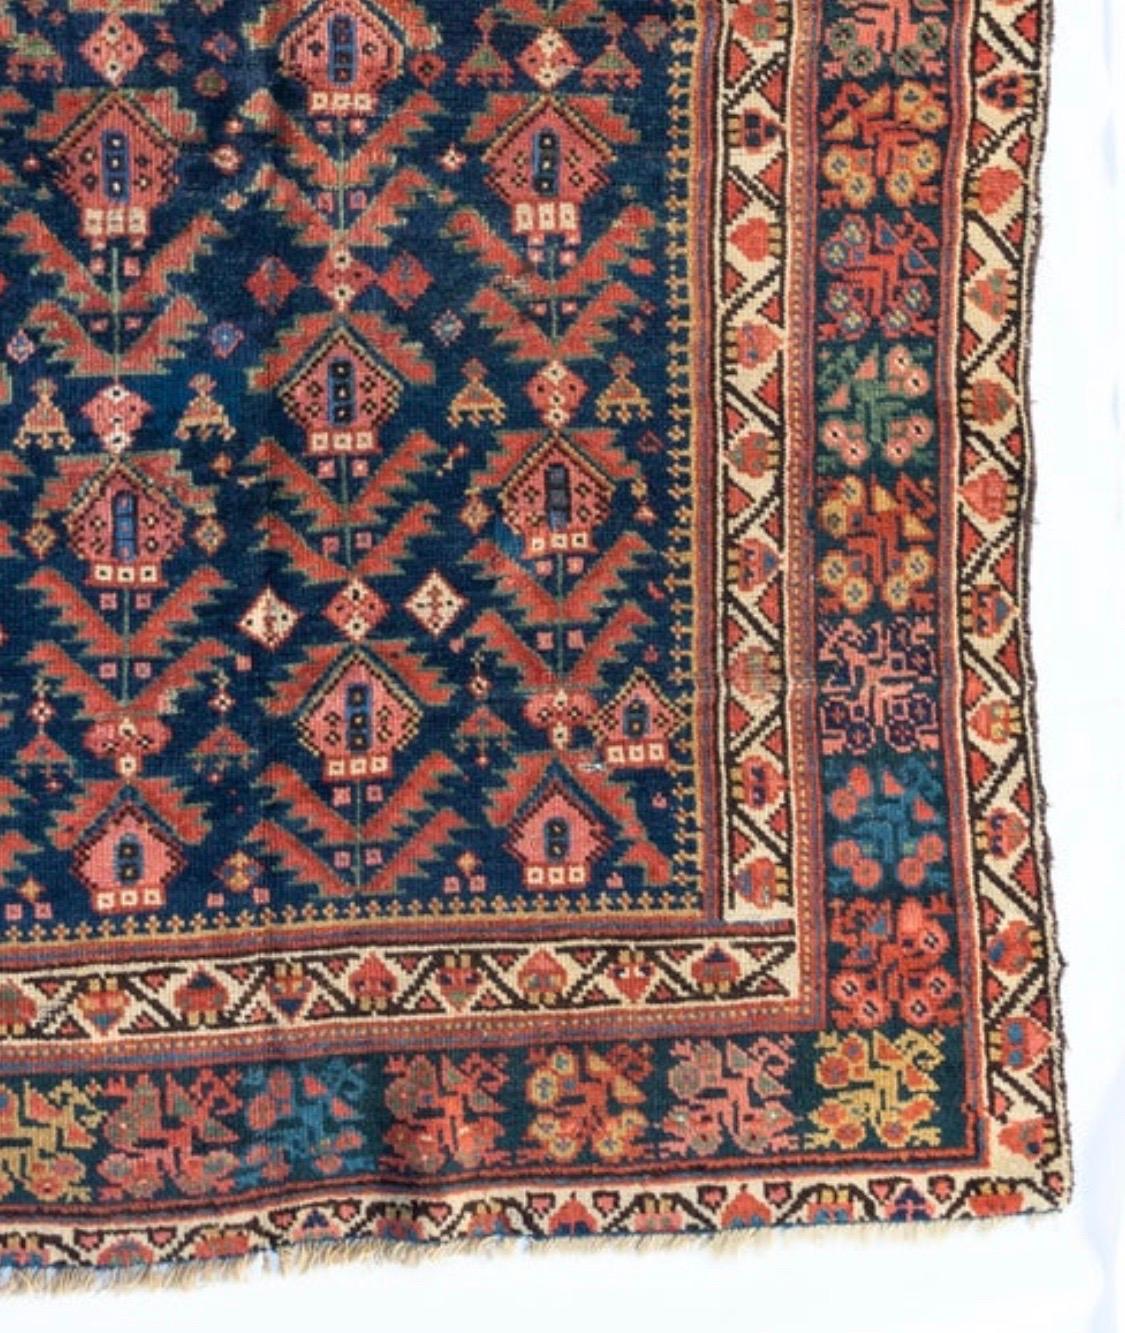 Antique Rust Ivory Navy Blue Tribal Persian Hamedan Area Rug, circa 1900-1910 In Good Condition For Sale In New York, NY